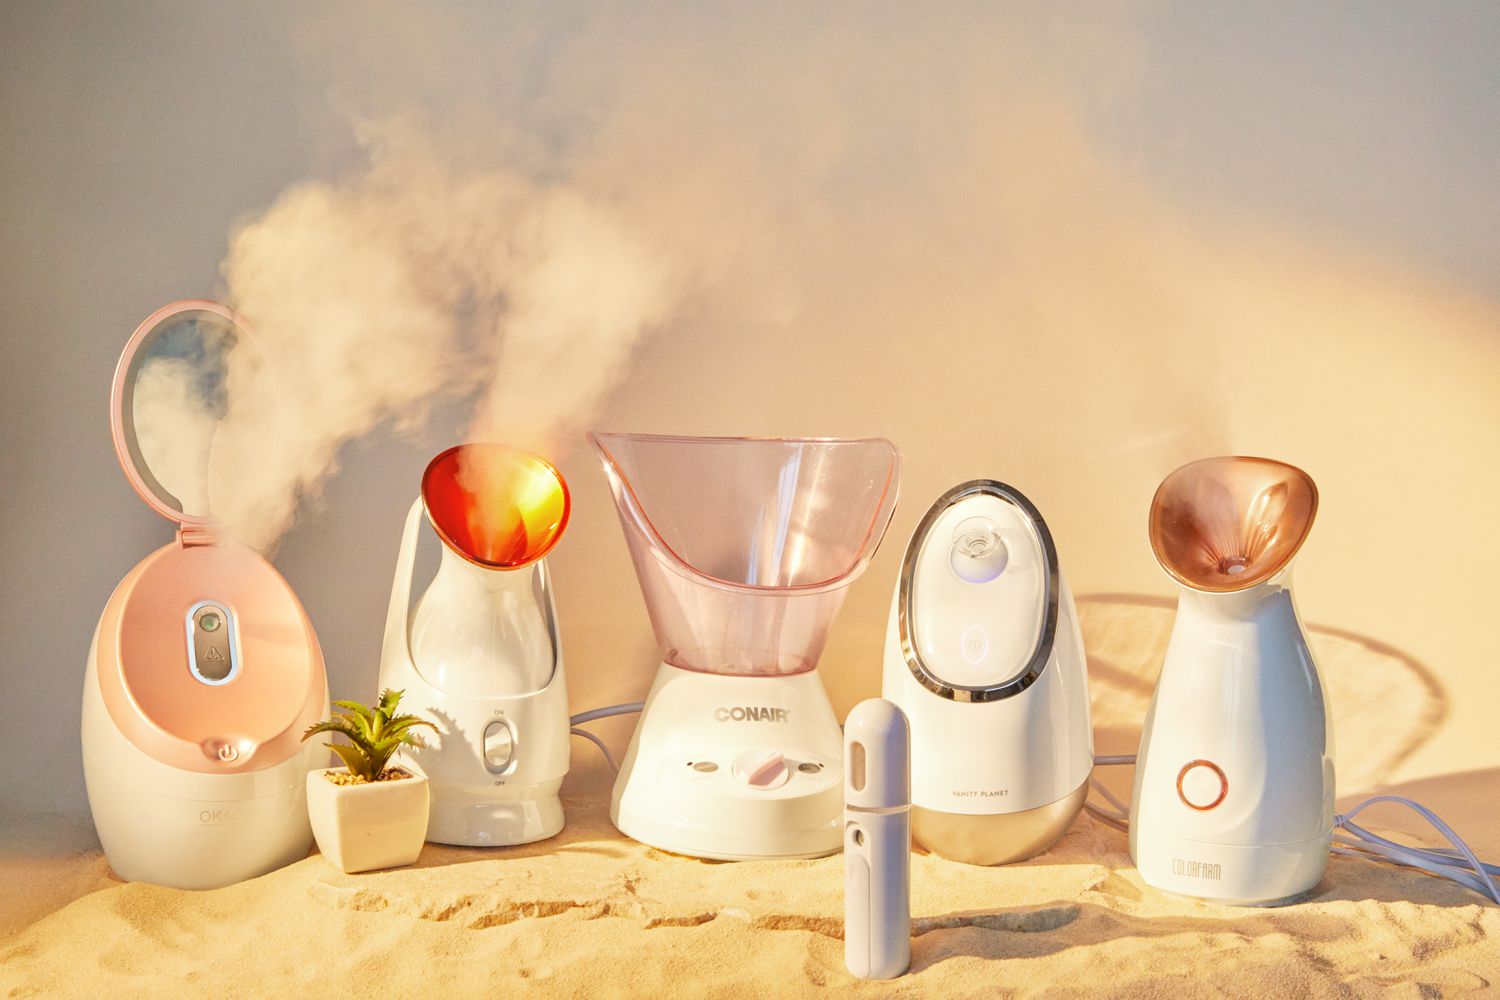 Facial Steamer Review: The Best Way to Achieve Radiant Skin